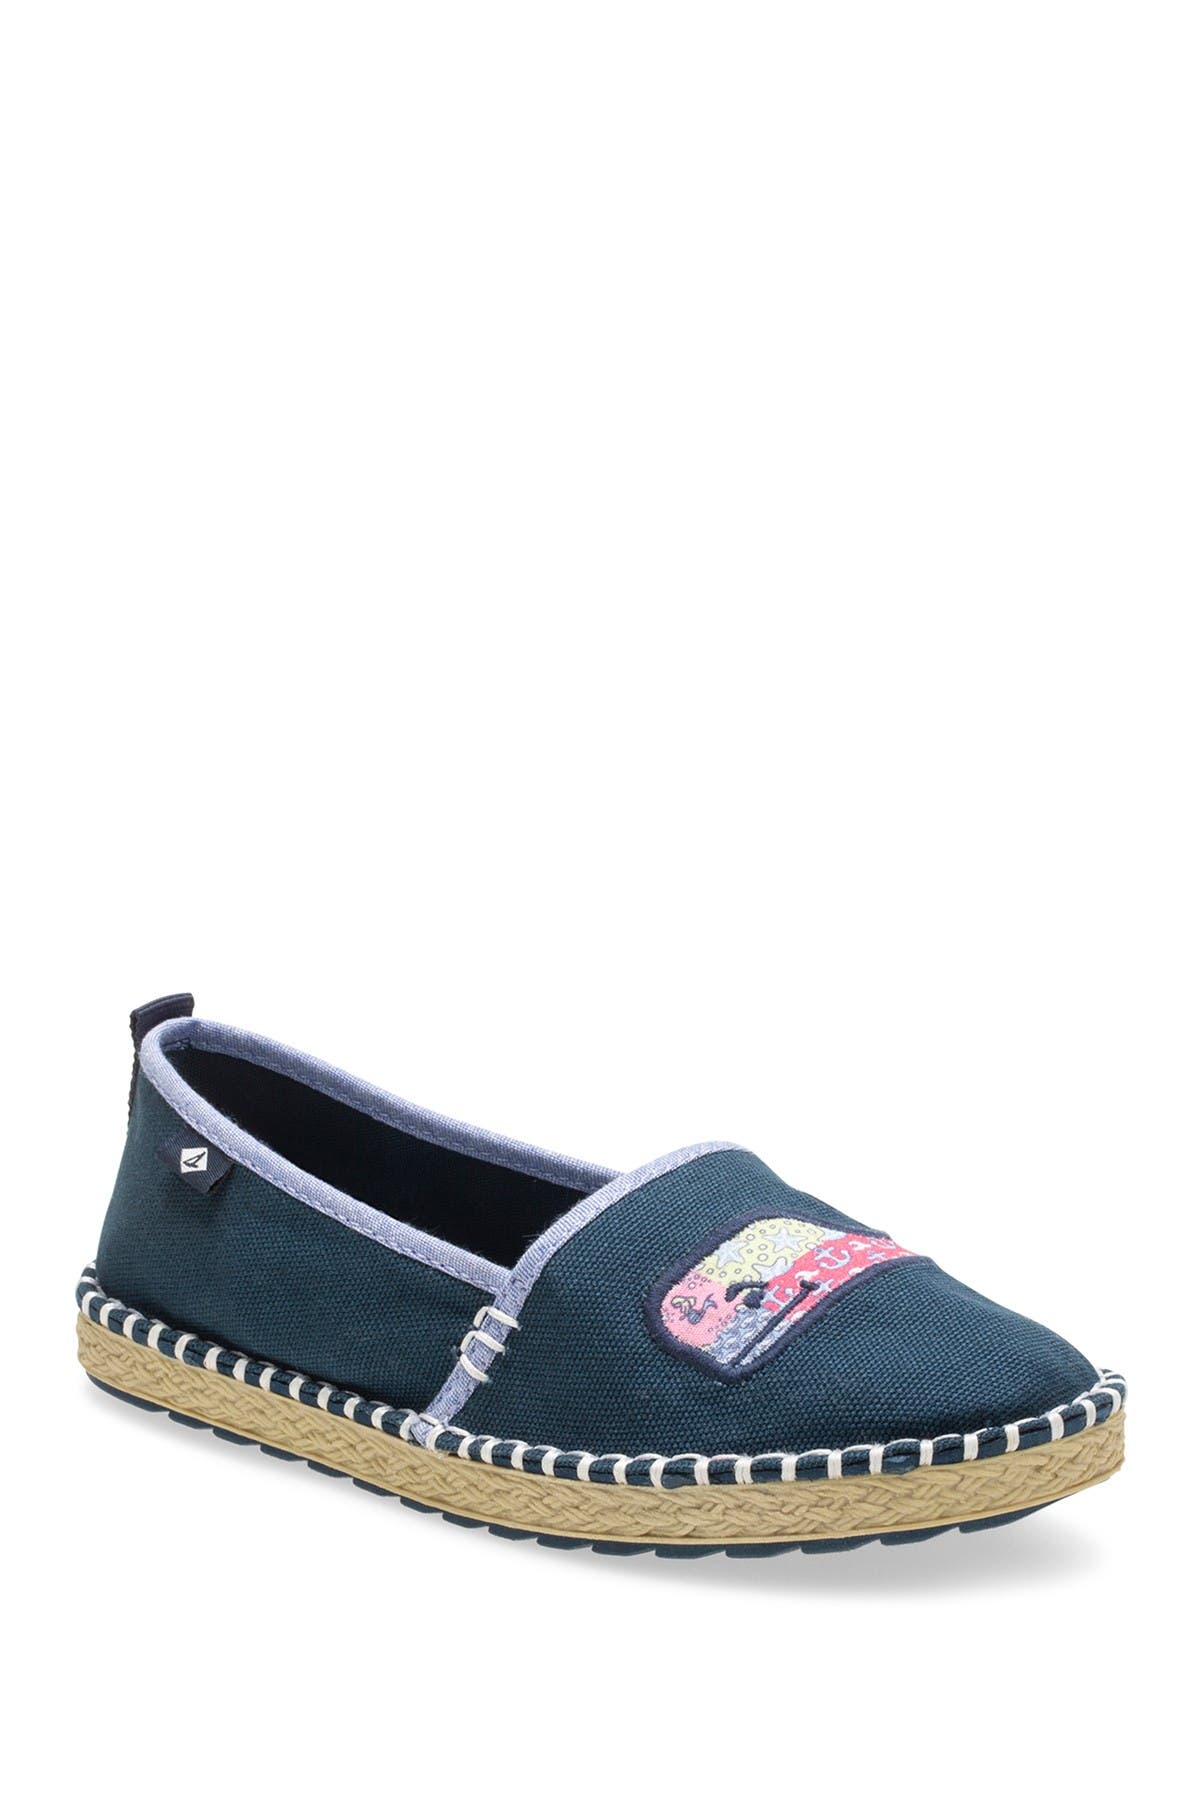 girls clearance shoes